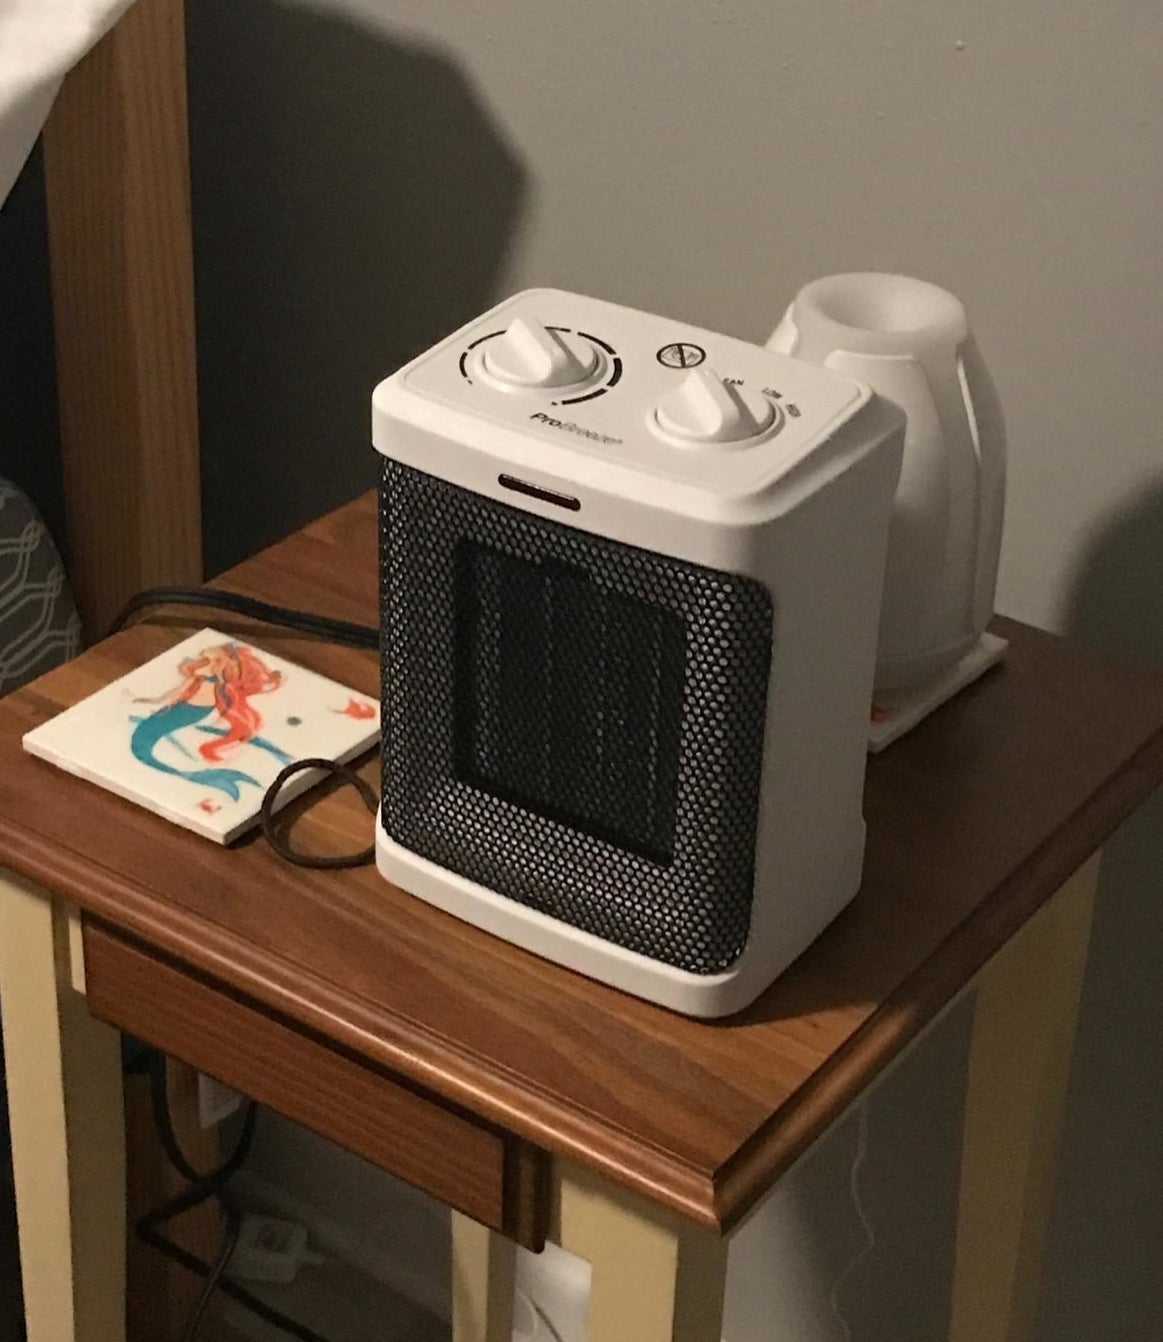 The space heater on top of a small table